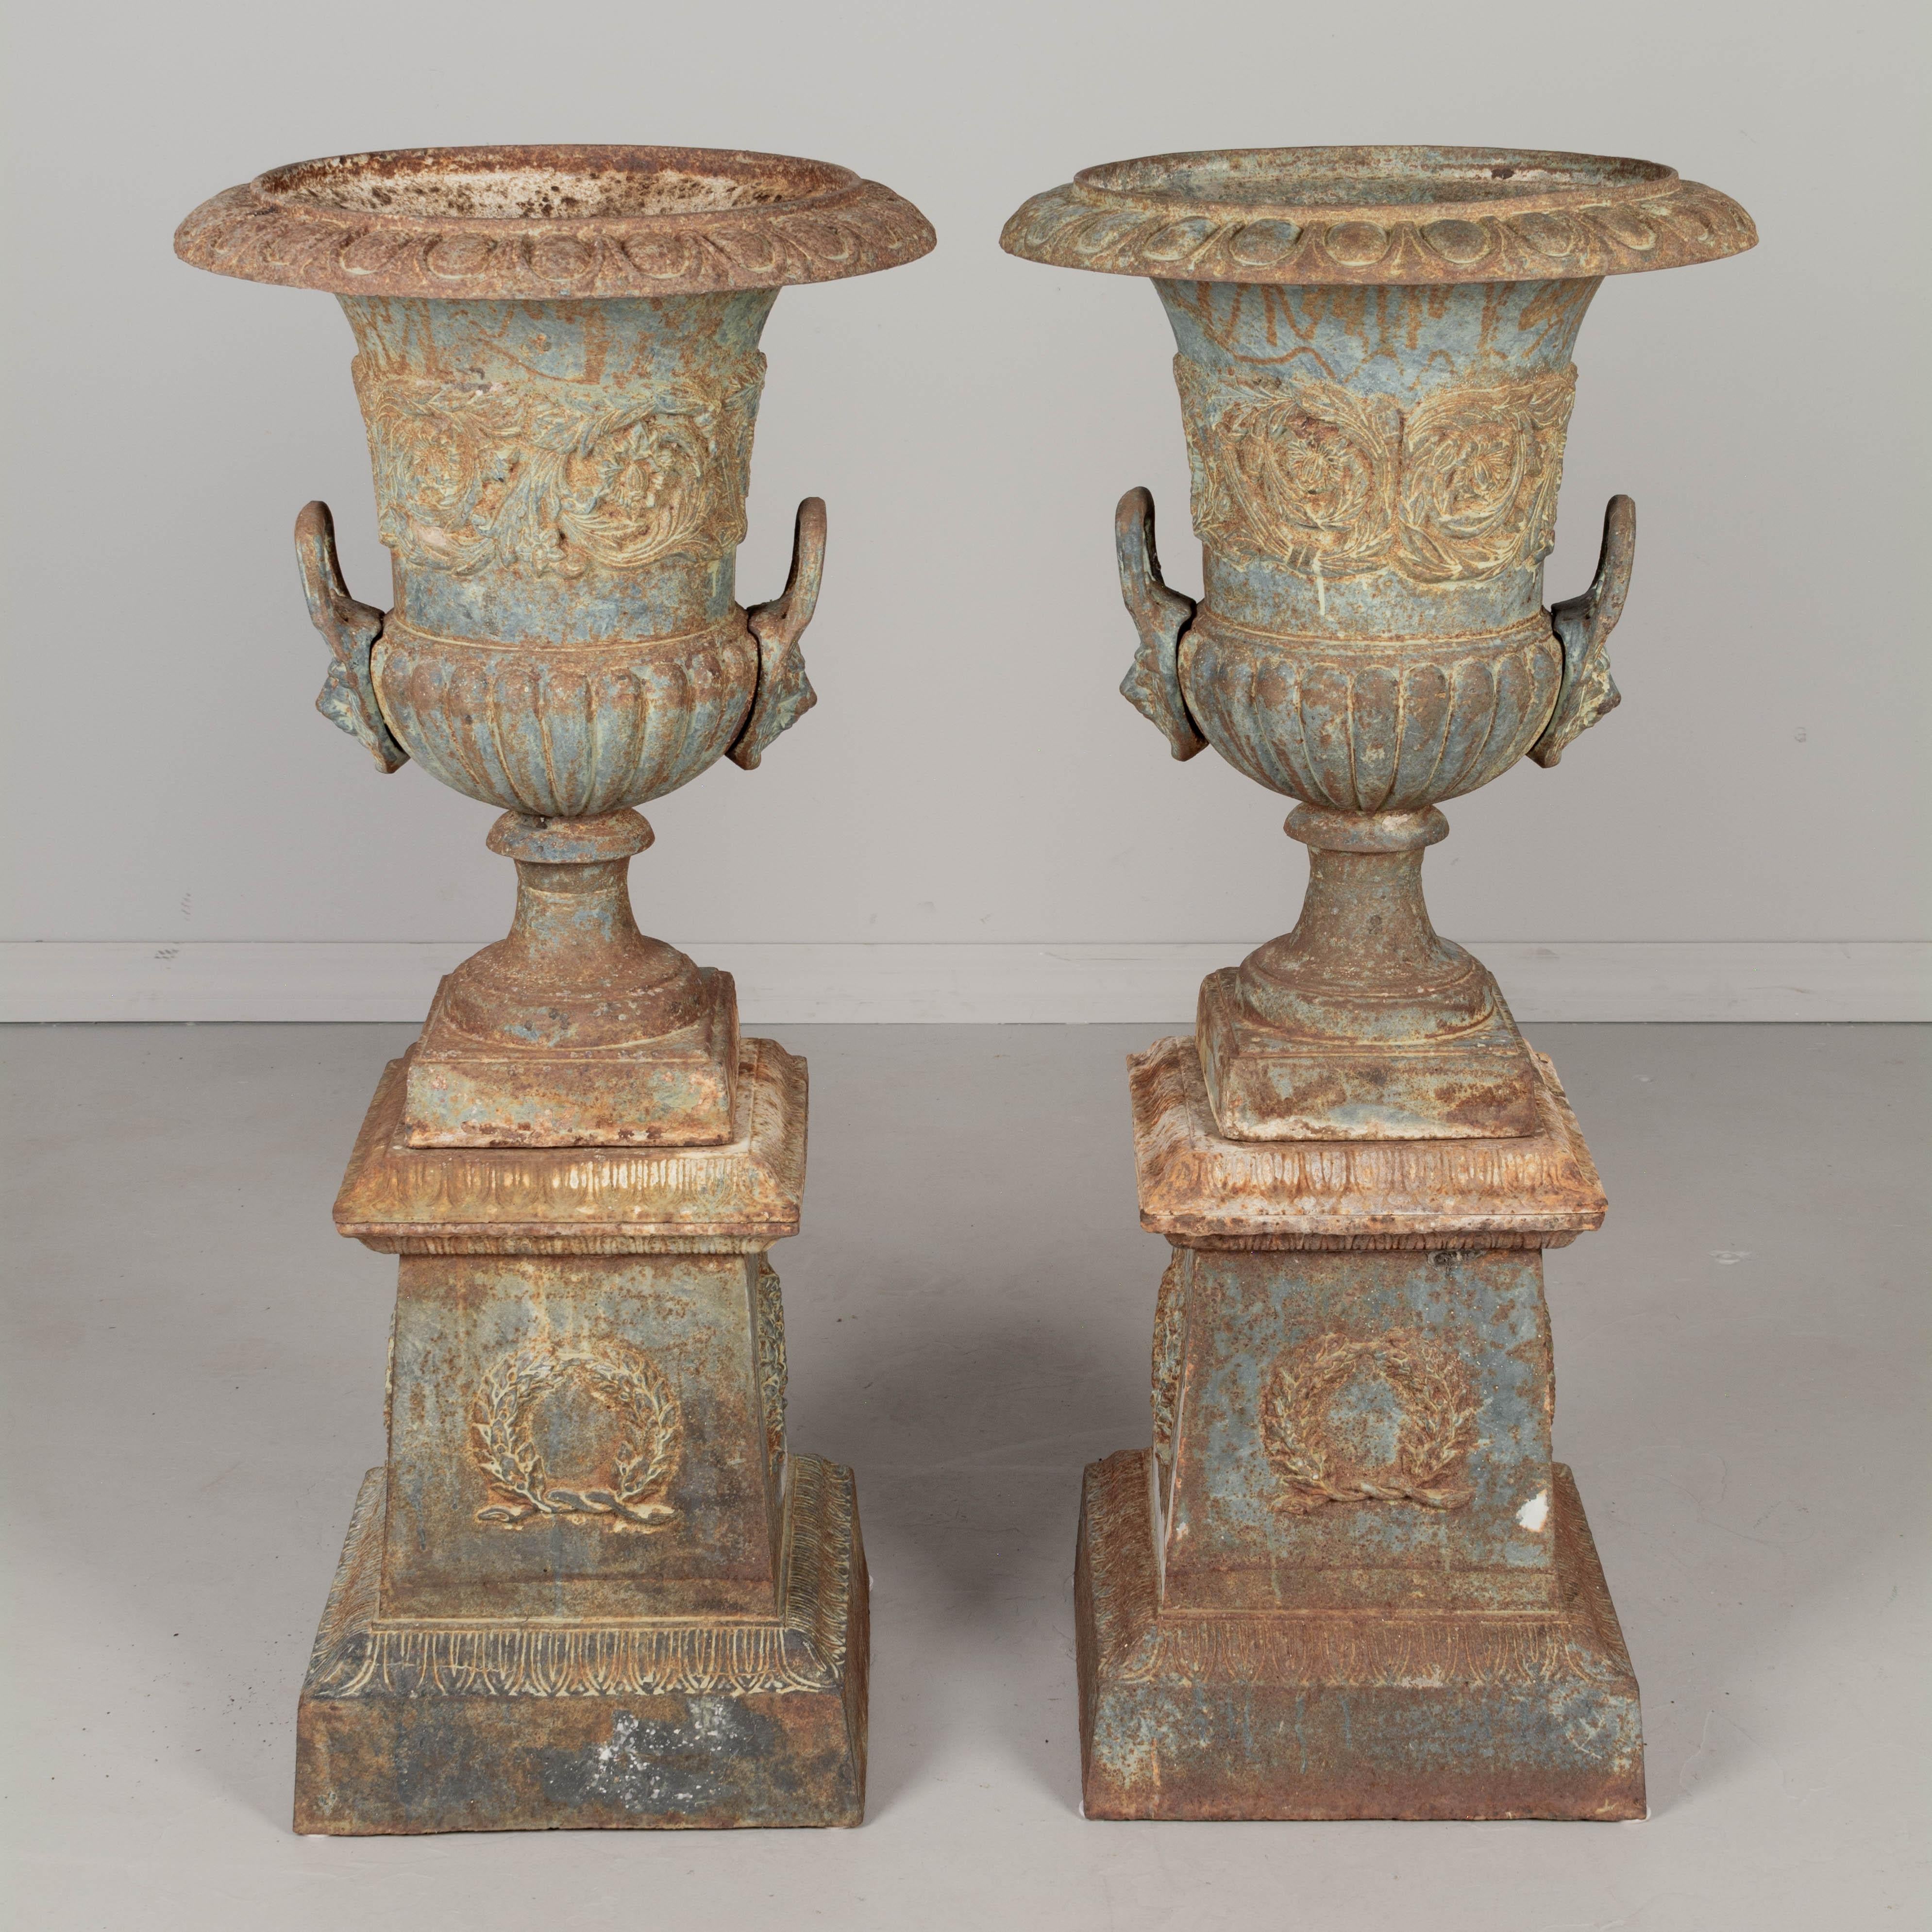 A pair of 19th century French cast iron garden urn planters. In three parts, the tall urn rests on a pedestal base which has a removable rim. Fine cast details with large lion head handles and swirling foliate relief across the face of the urns and